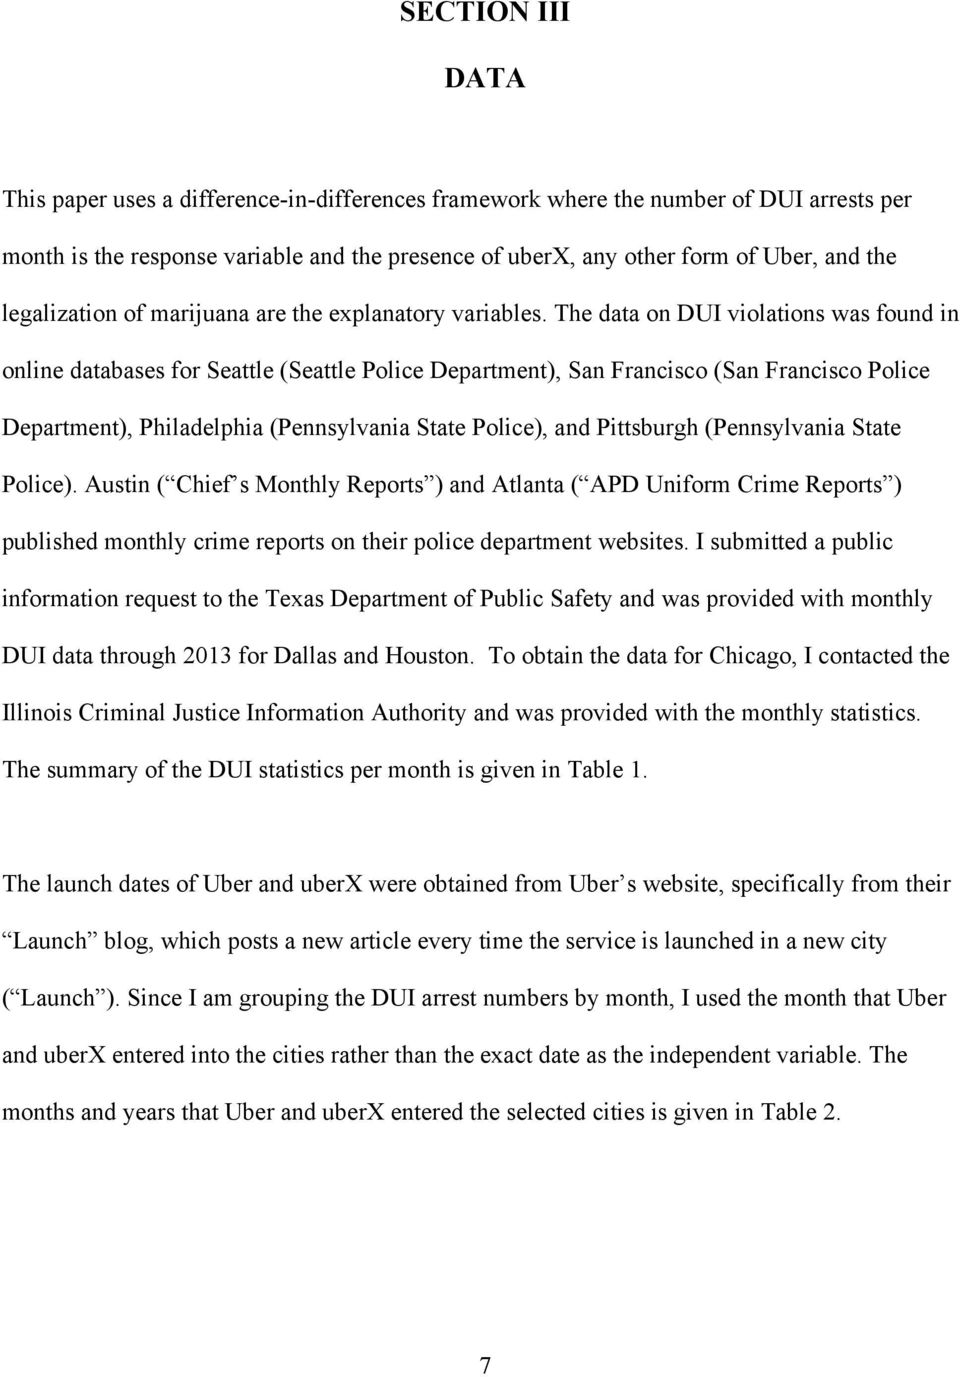 The data on DUI violations was found in online databases for Seattle (Seattle Police Department), San Francisco (San Francisco Police Department), Philadelphia (Pennsylvania State Police), and